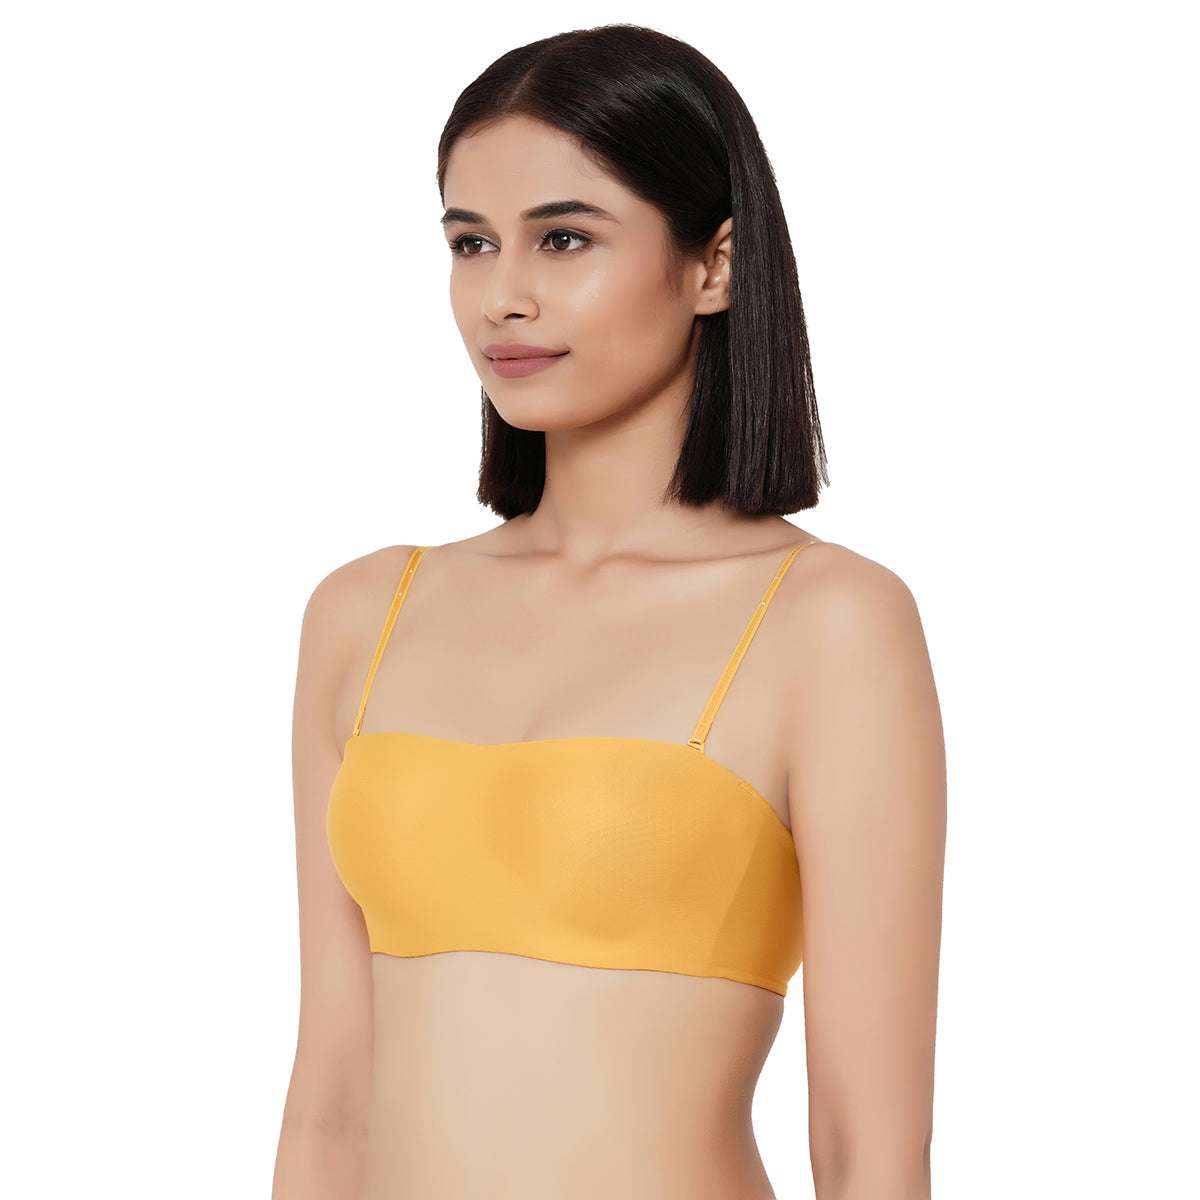 Basic Mold Padded Wired Half Cup Strapless Bandeau T Shirt Bra Yellow